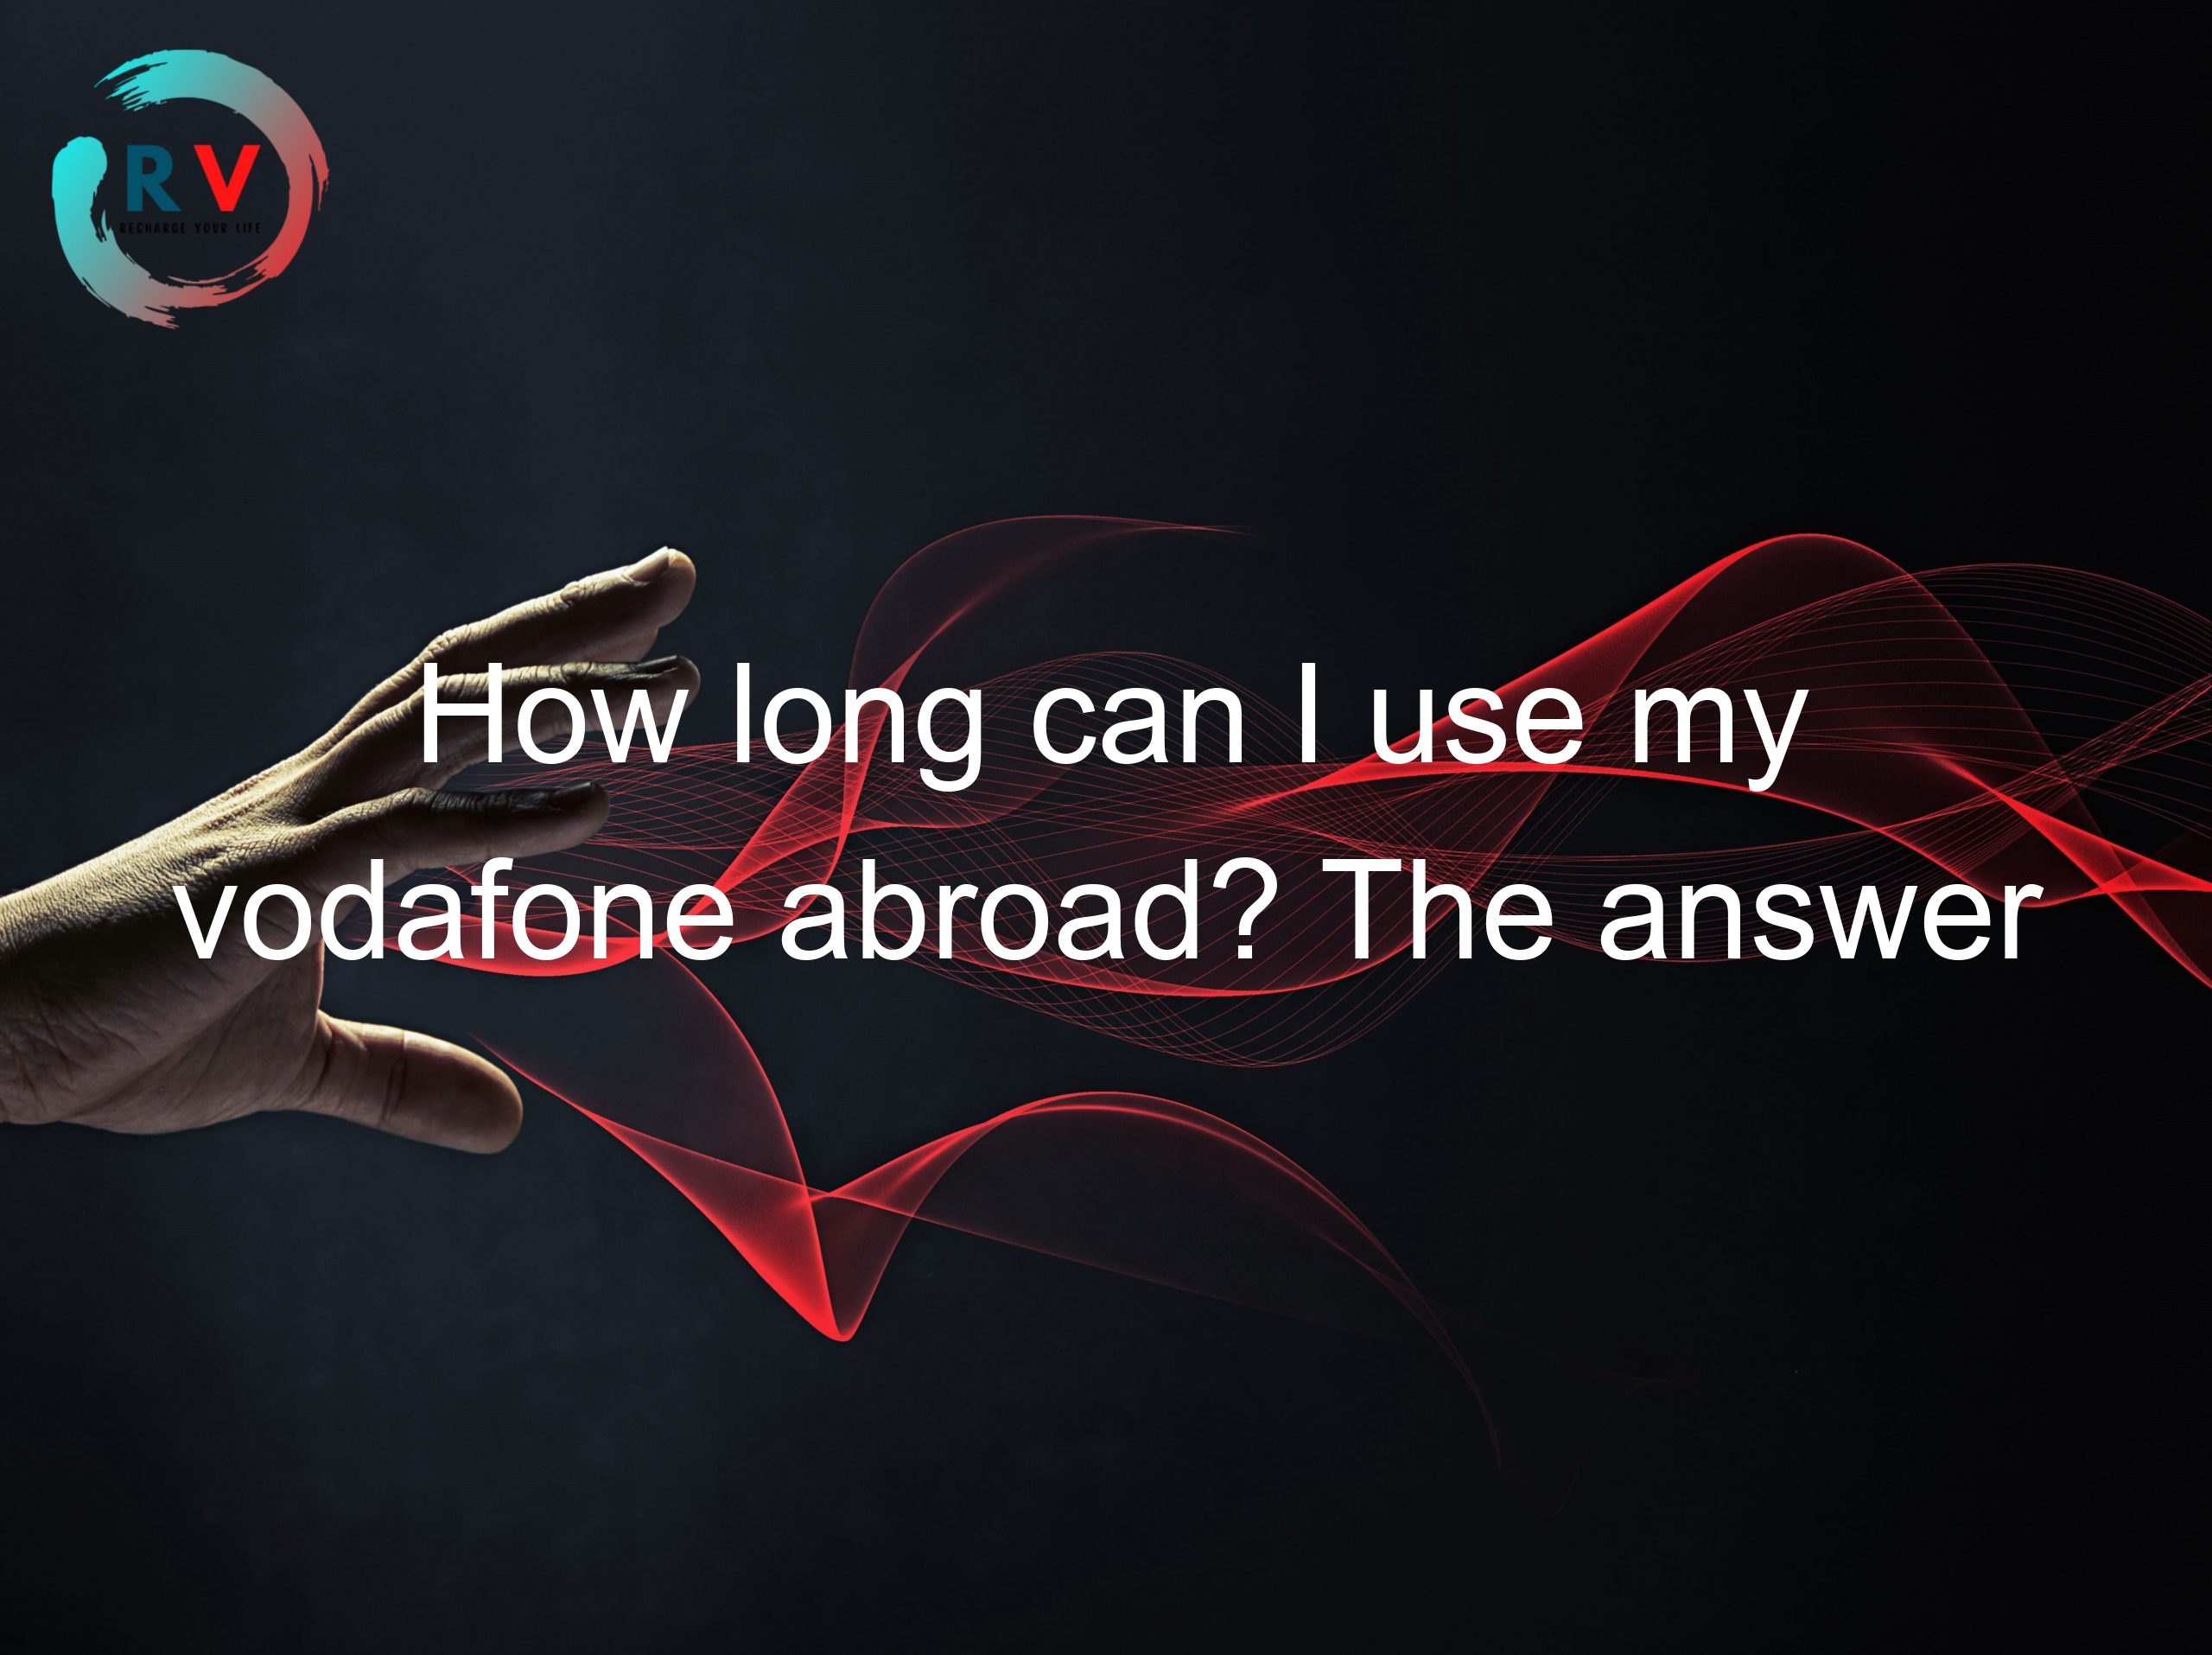 How long can I use my vodafone abroad? The answer may surprise you!